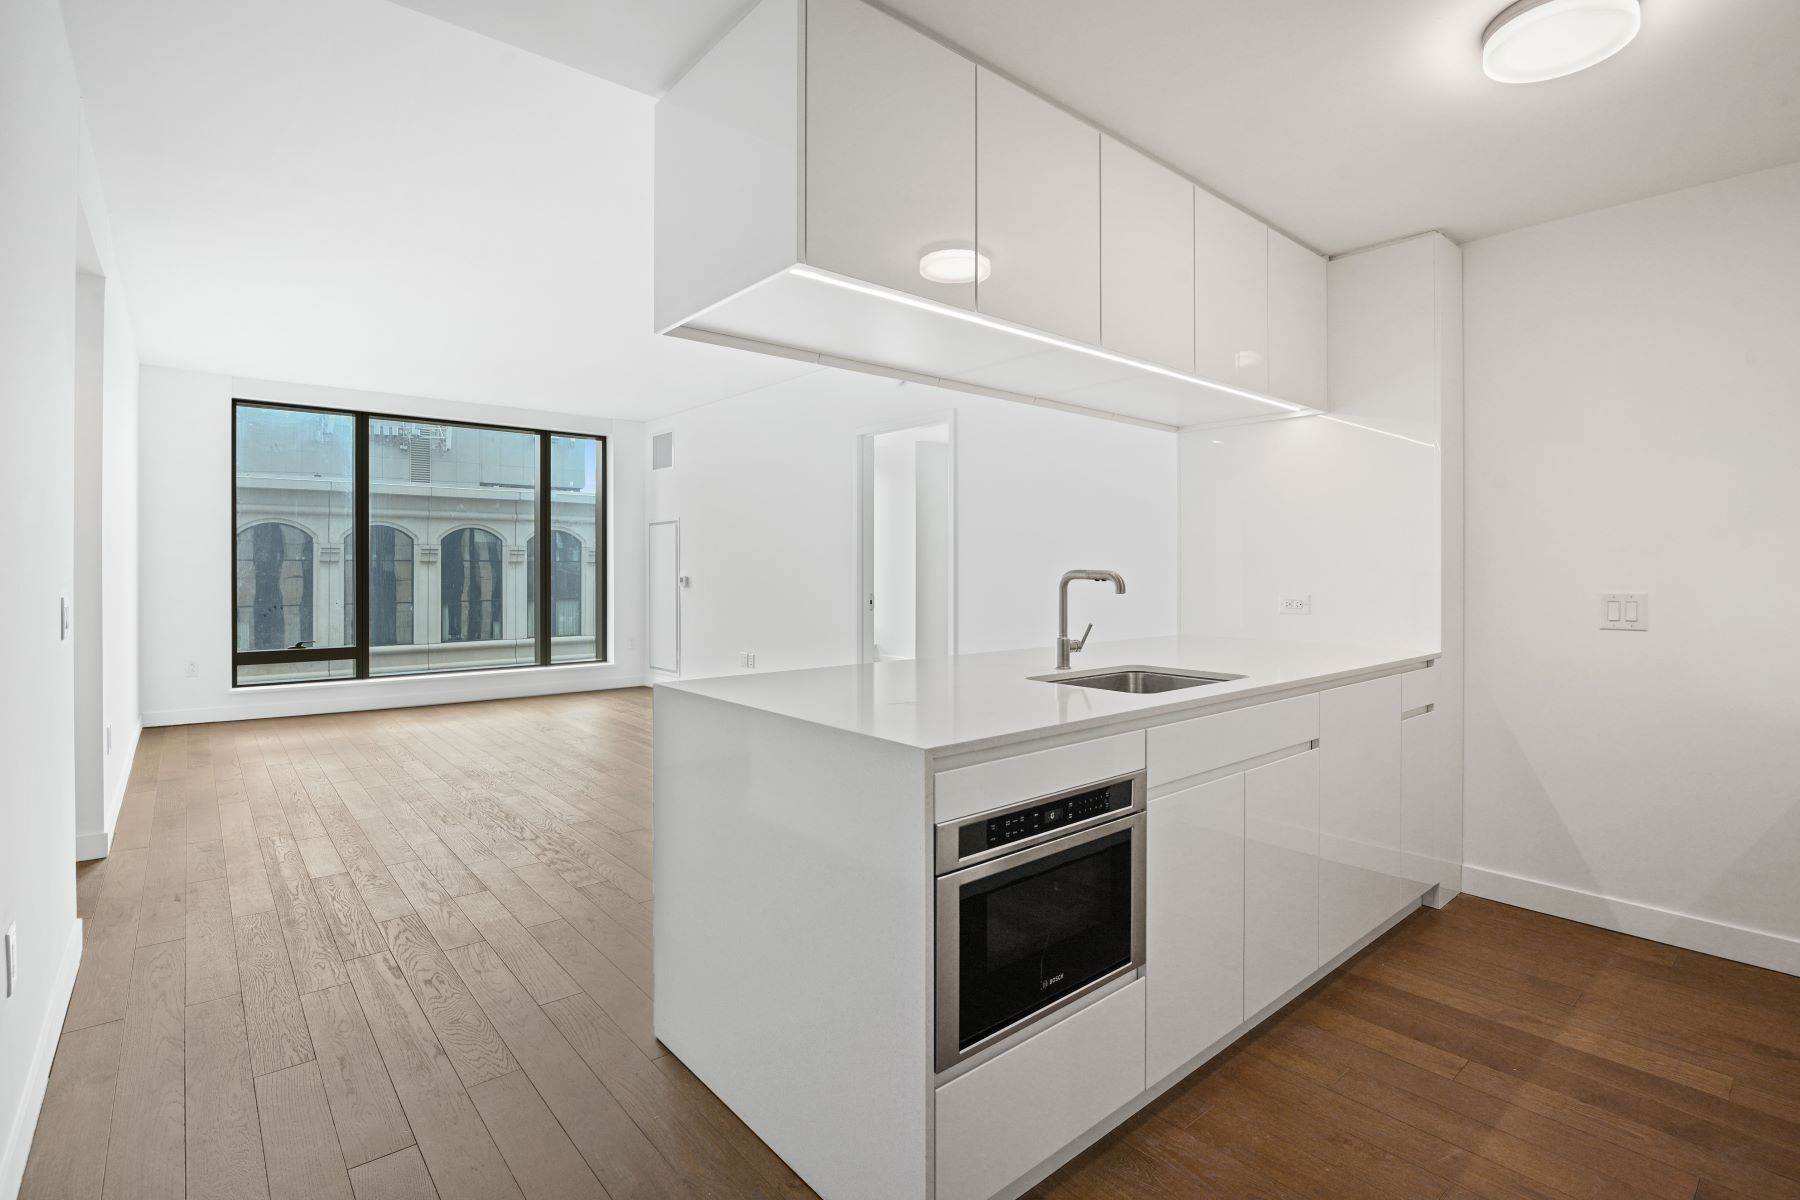 Condominiums for Sale at “99 Hudson” 99 Hudson Street, Unit 1106 Jersey City, New Jersey 07302 United States